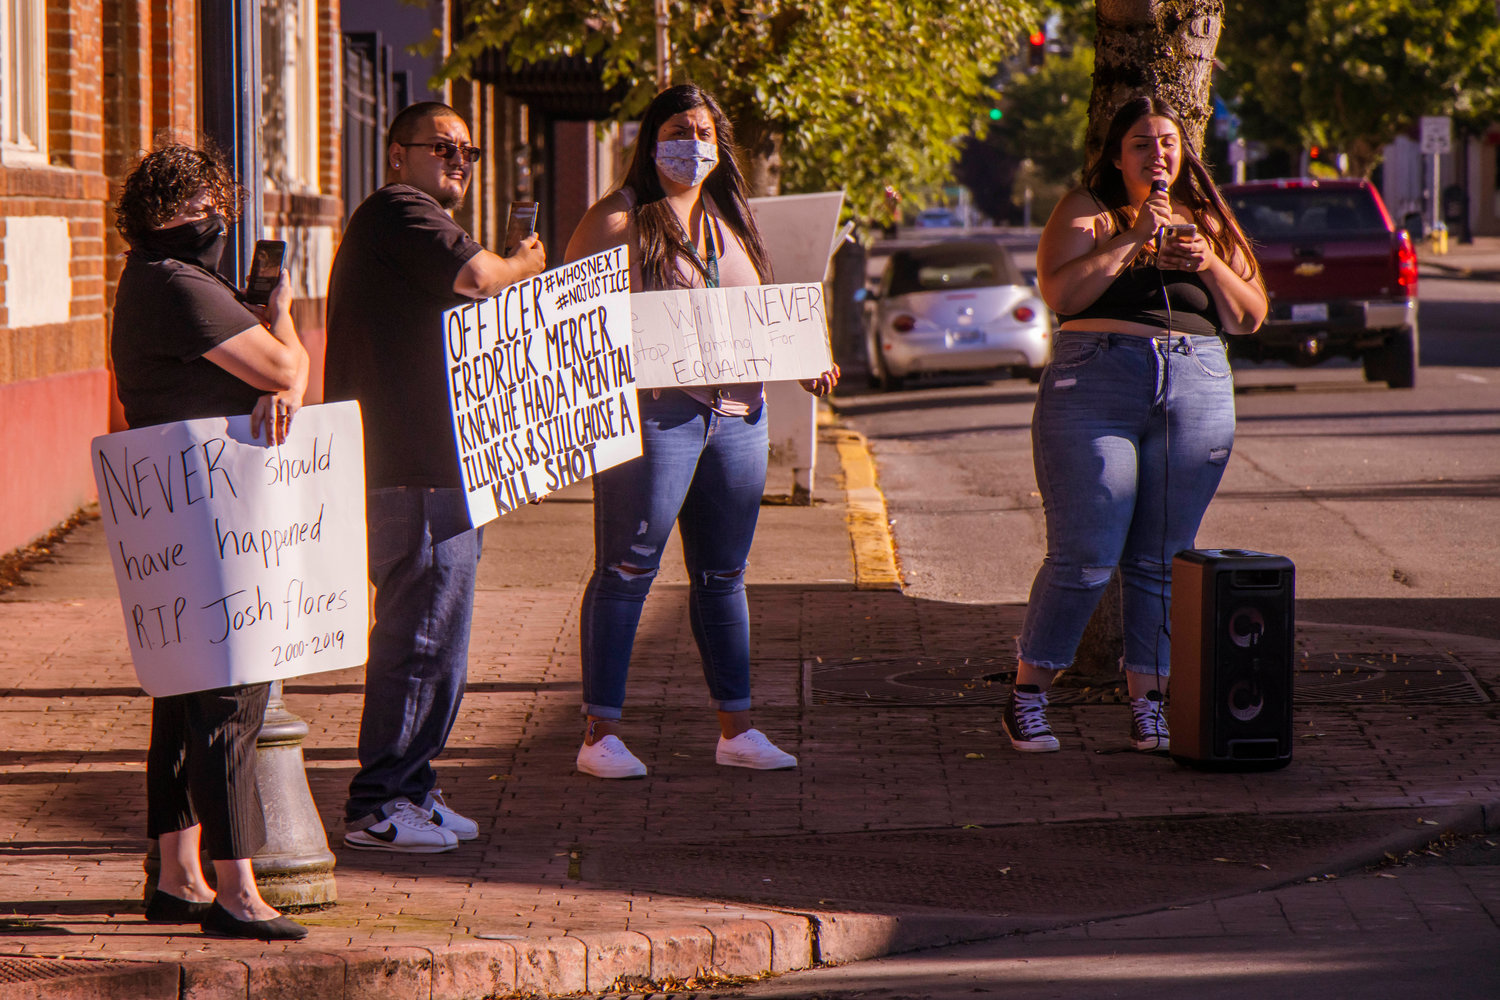 Demonstrators gather outside the Centralia Police Station Monday afternoon to honor the life of Joshua Flores who died on June 18, 2019 at the age of 18.